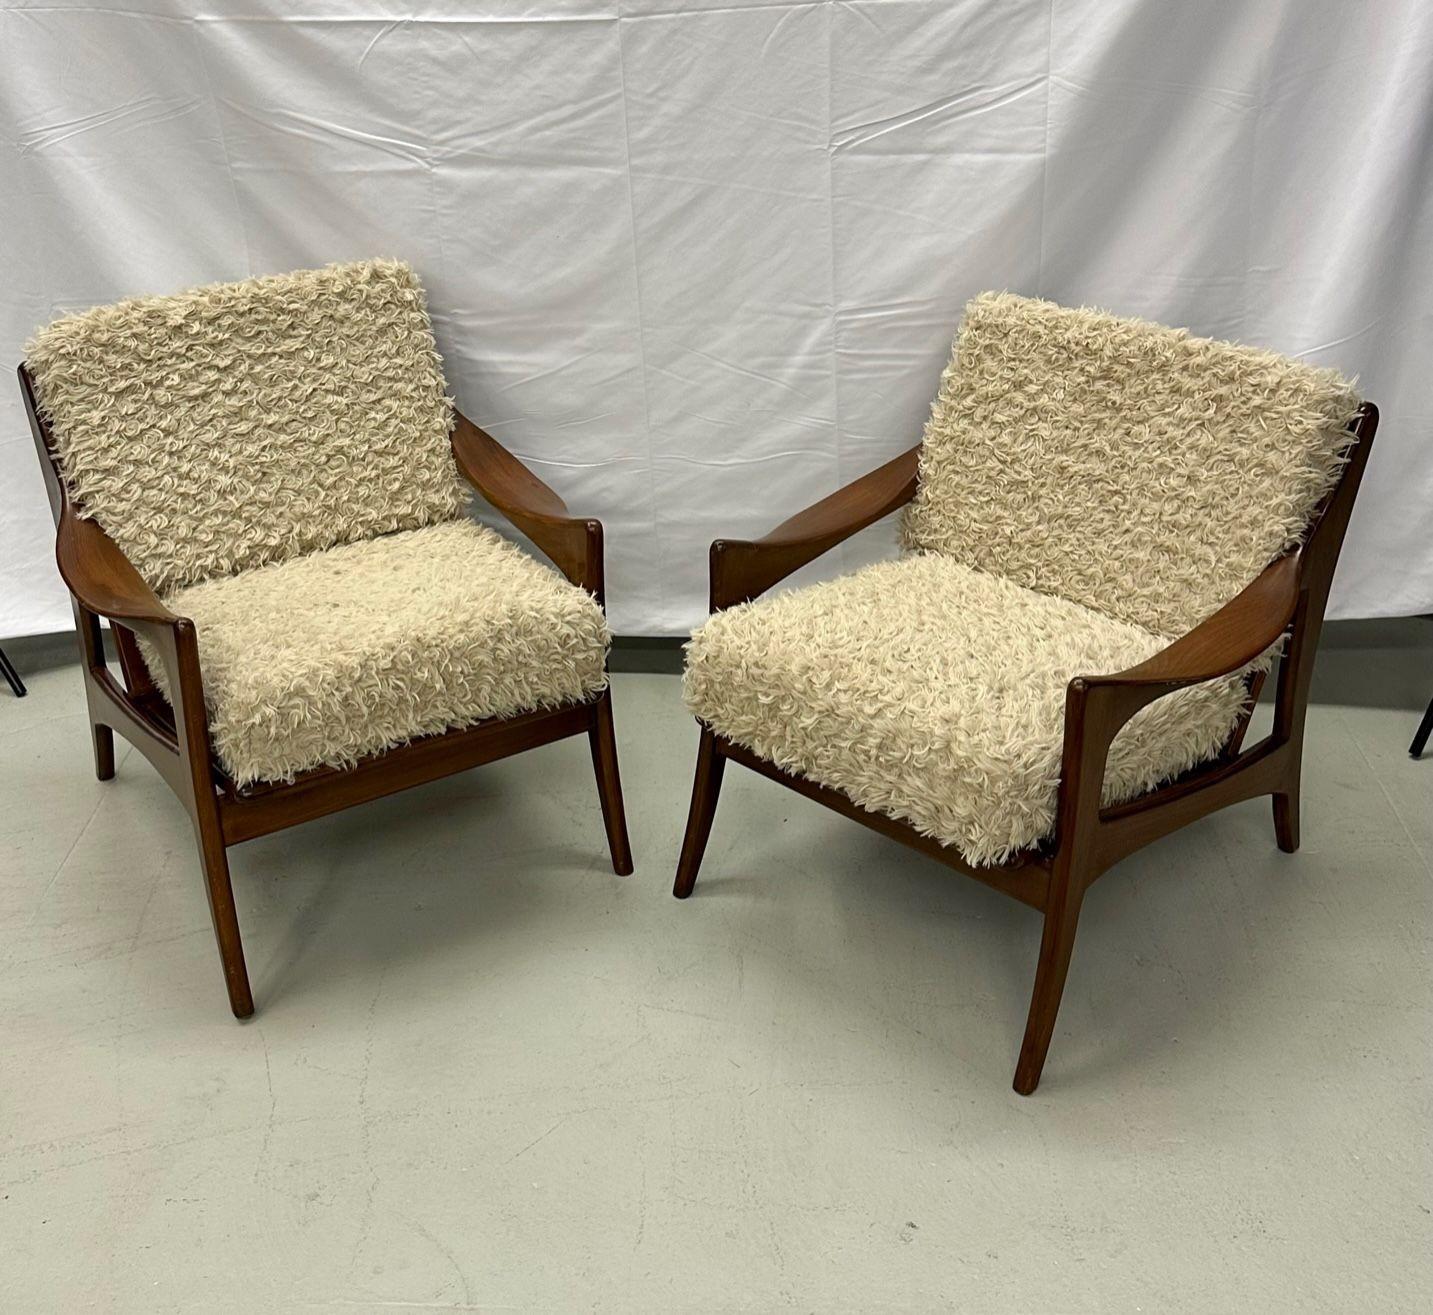 Pair of Dutch Mid-Century Modern Style Arm / Lounge Chairs, Teak, Brass For Sale 10